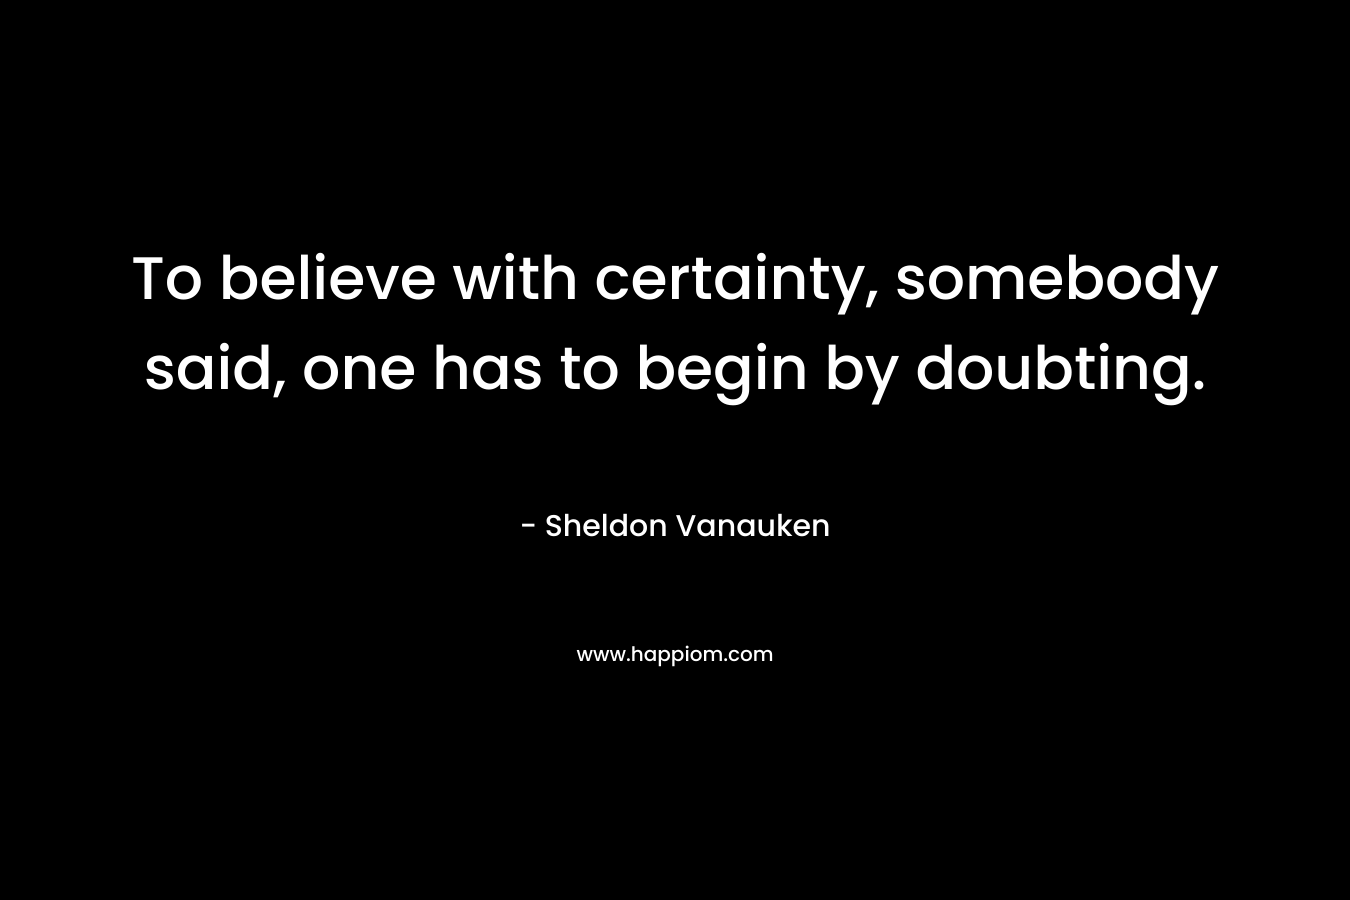 To believe with certainty, somebody said, one has to begin by doubting.